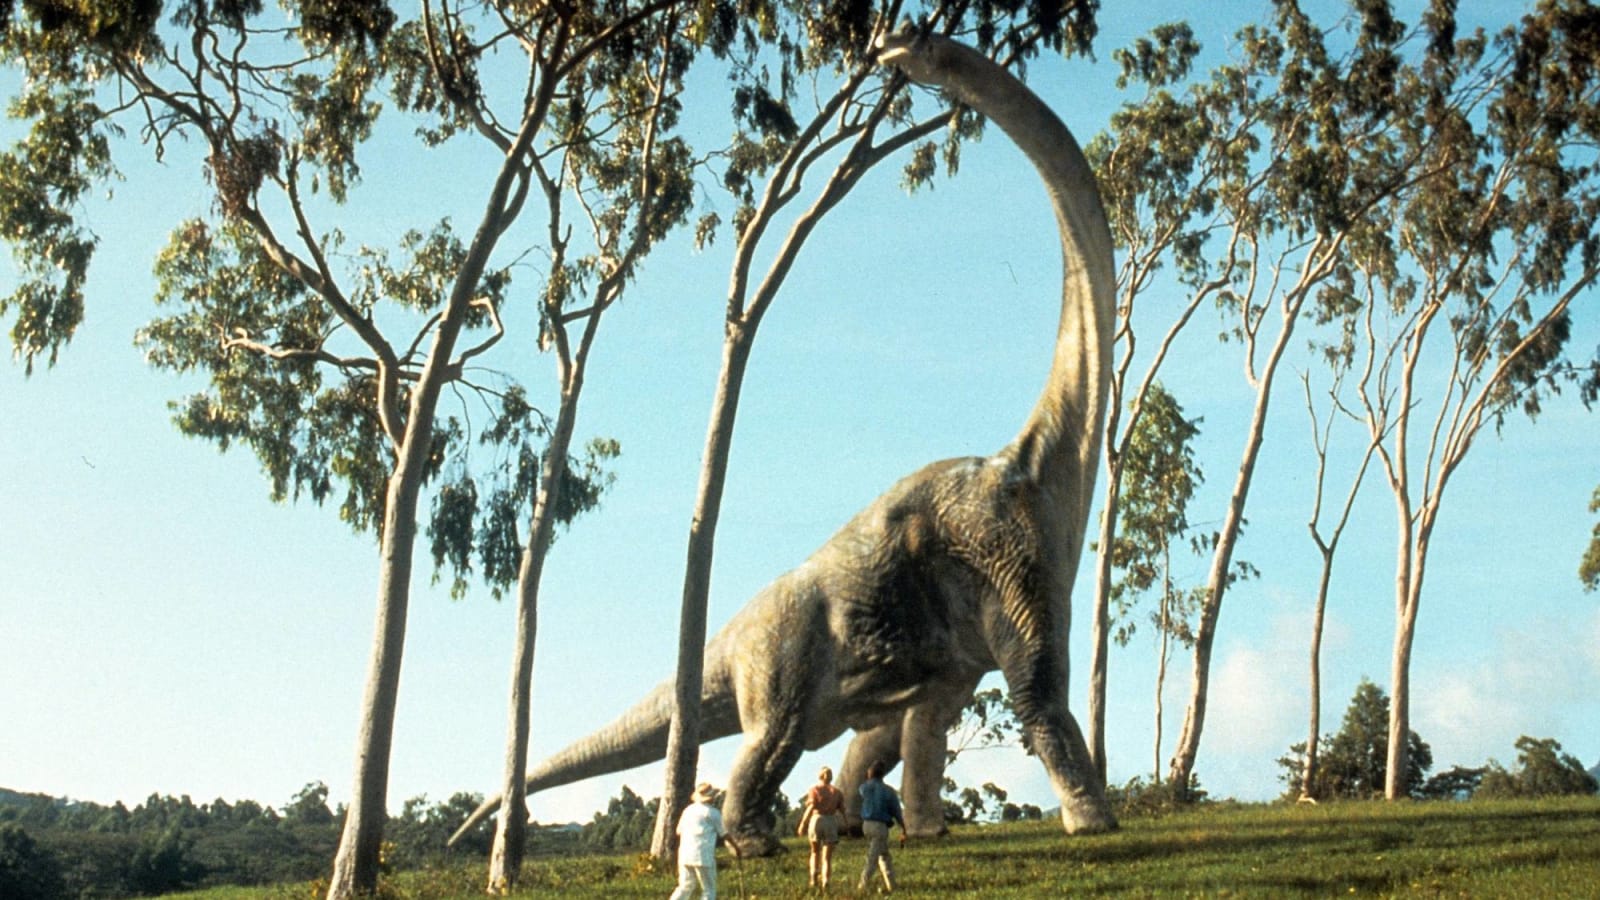 20 facts you might not know about 'Jurassic Park'